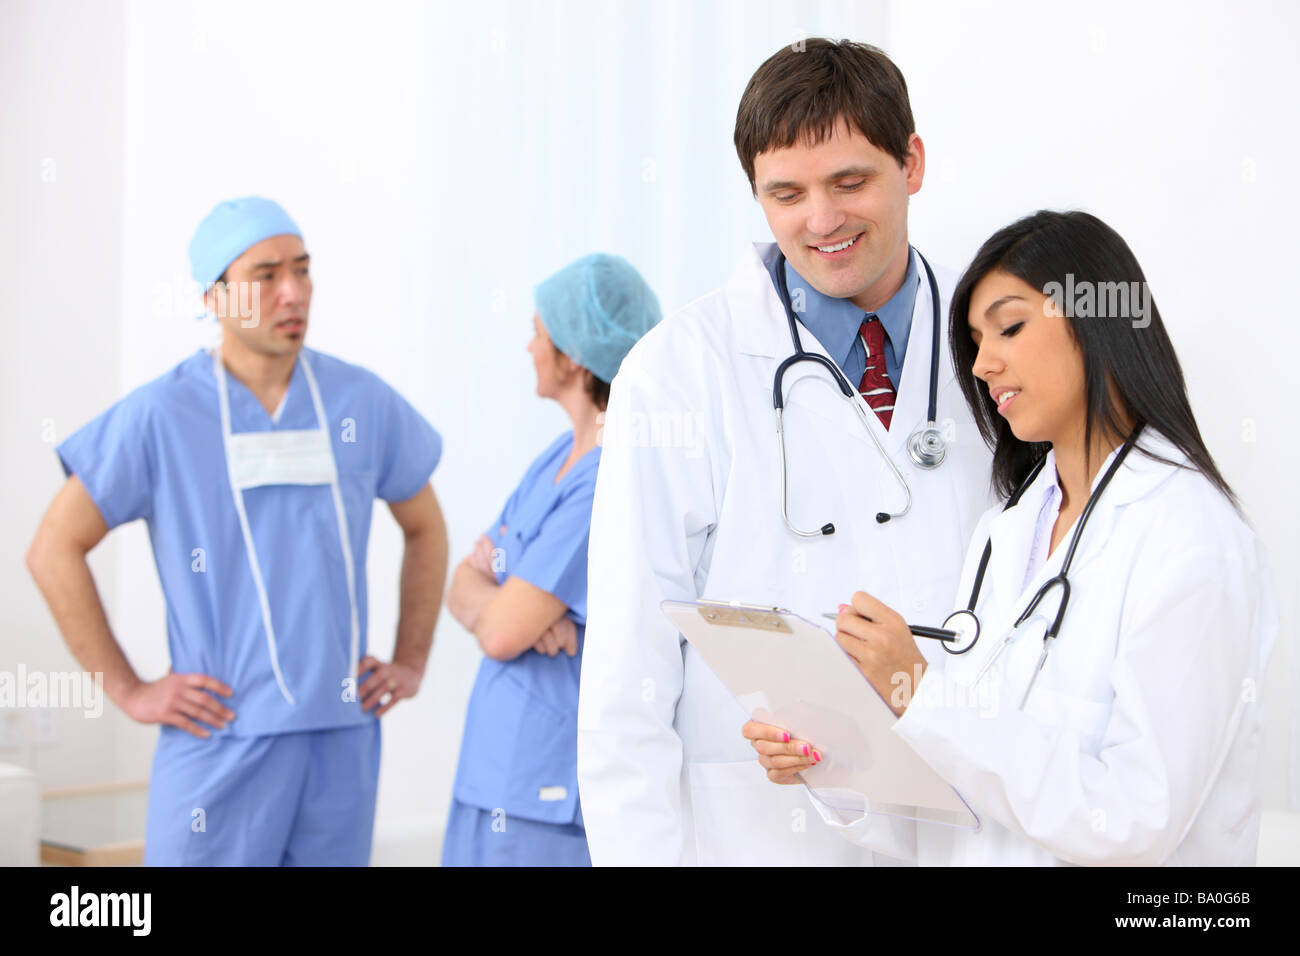 Medical personnel focus on people in foreground Stock Photo